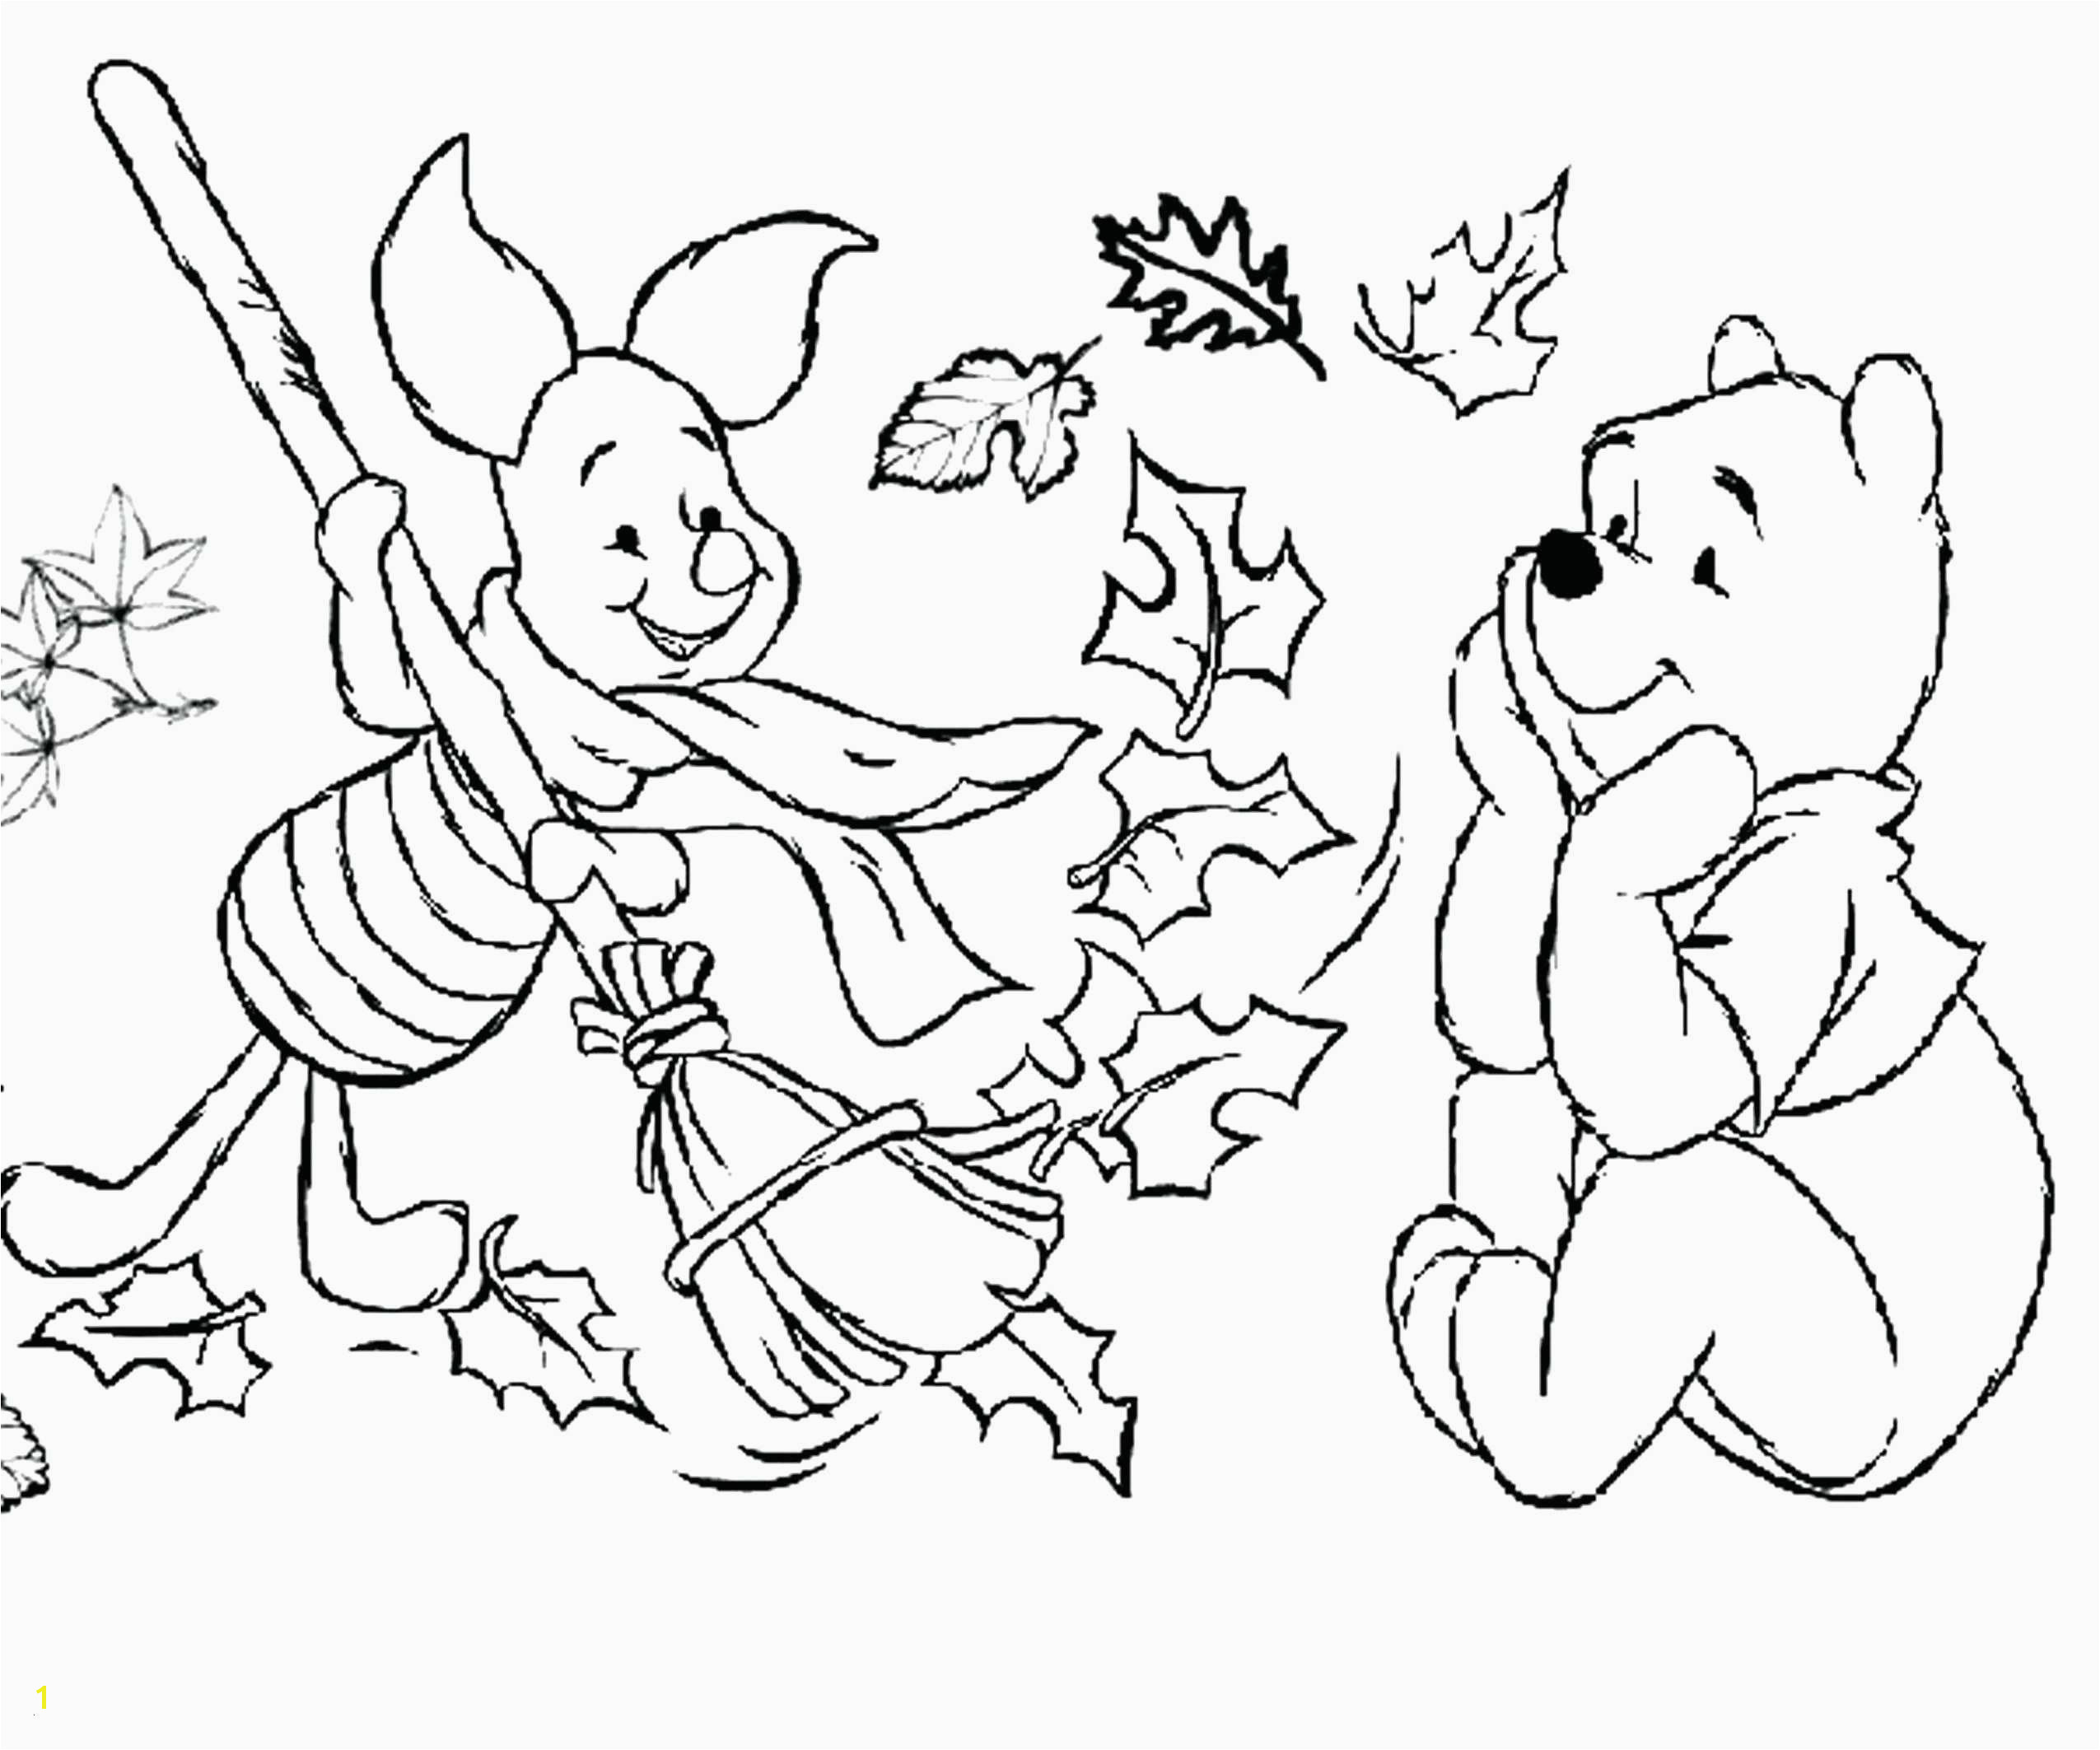 30 New Free Printing Coloring Pages cloud9vegas